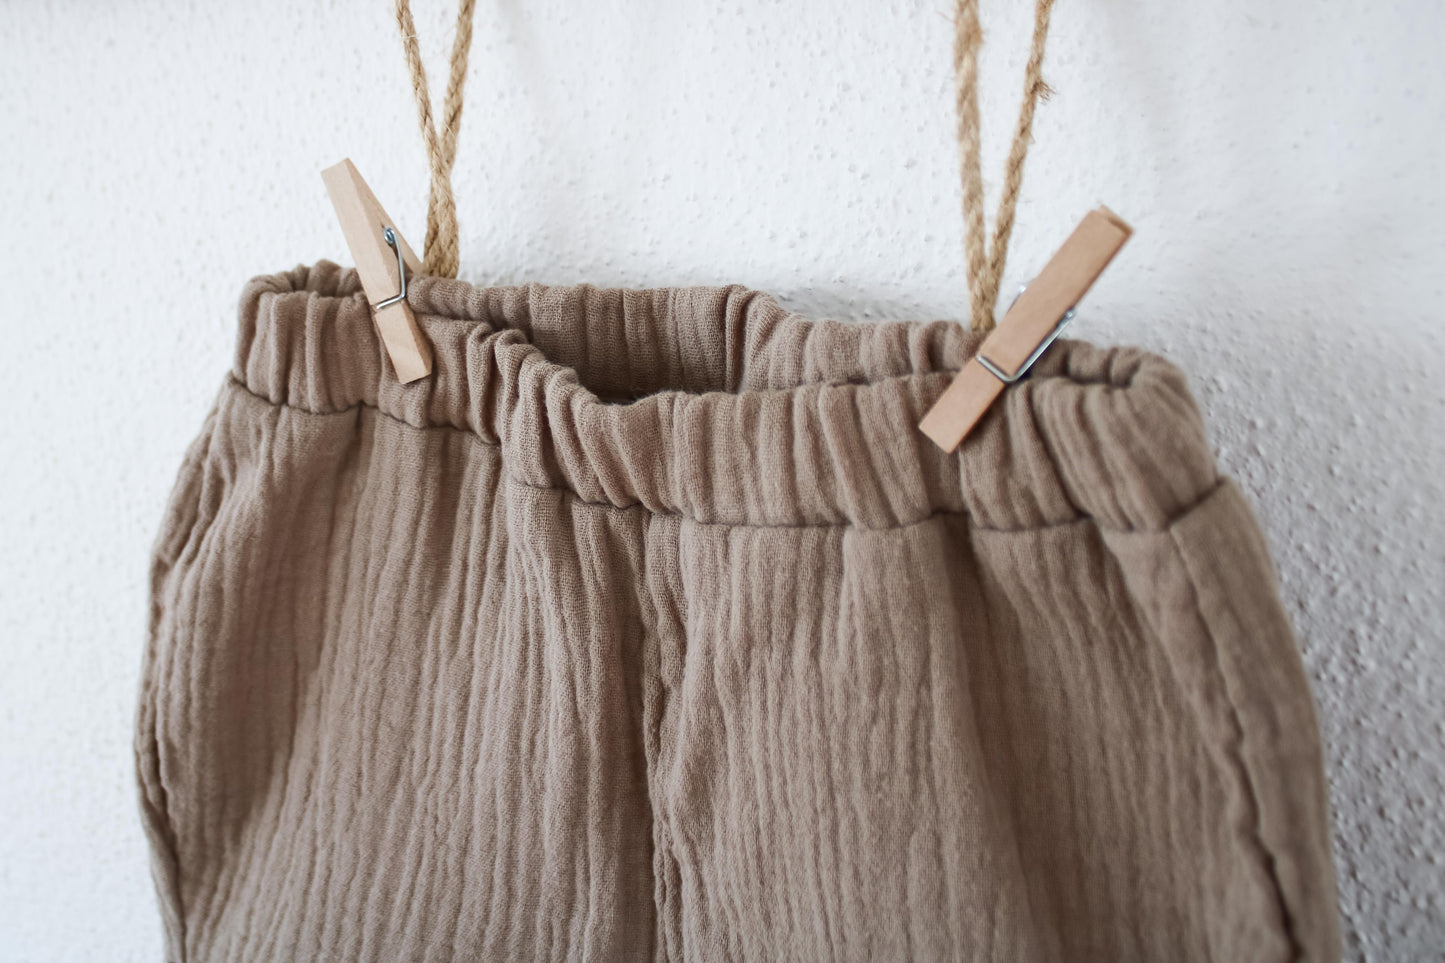 Shorts "Musselin" (Taupe)